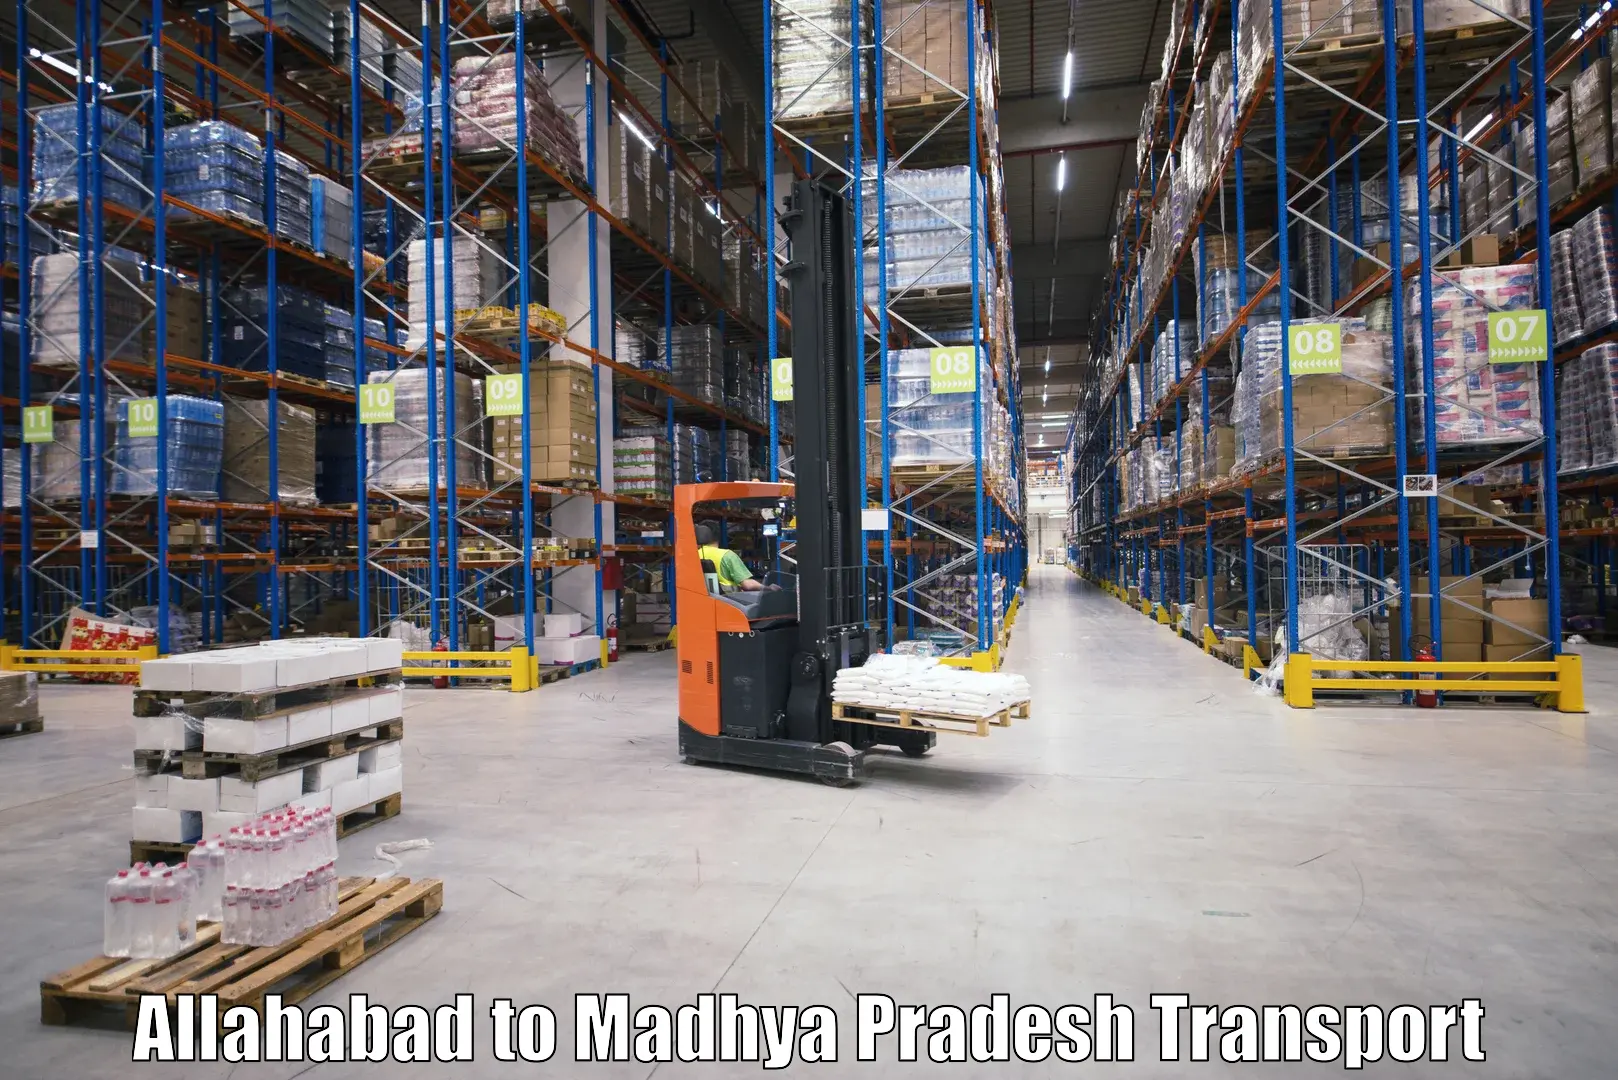 Nationwide transport services Allahabad to Khandwa